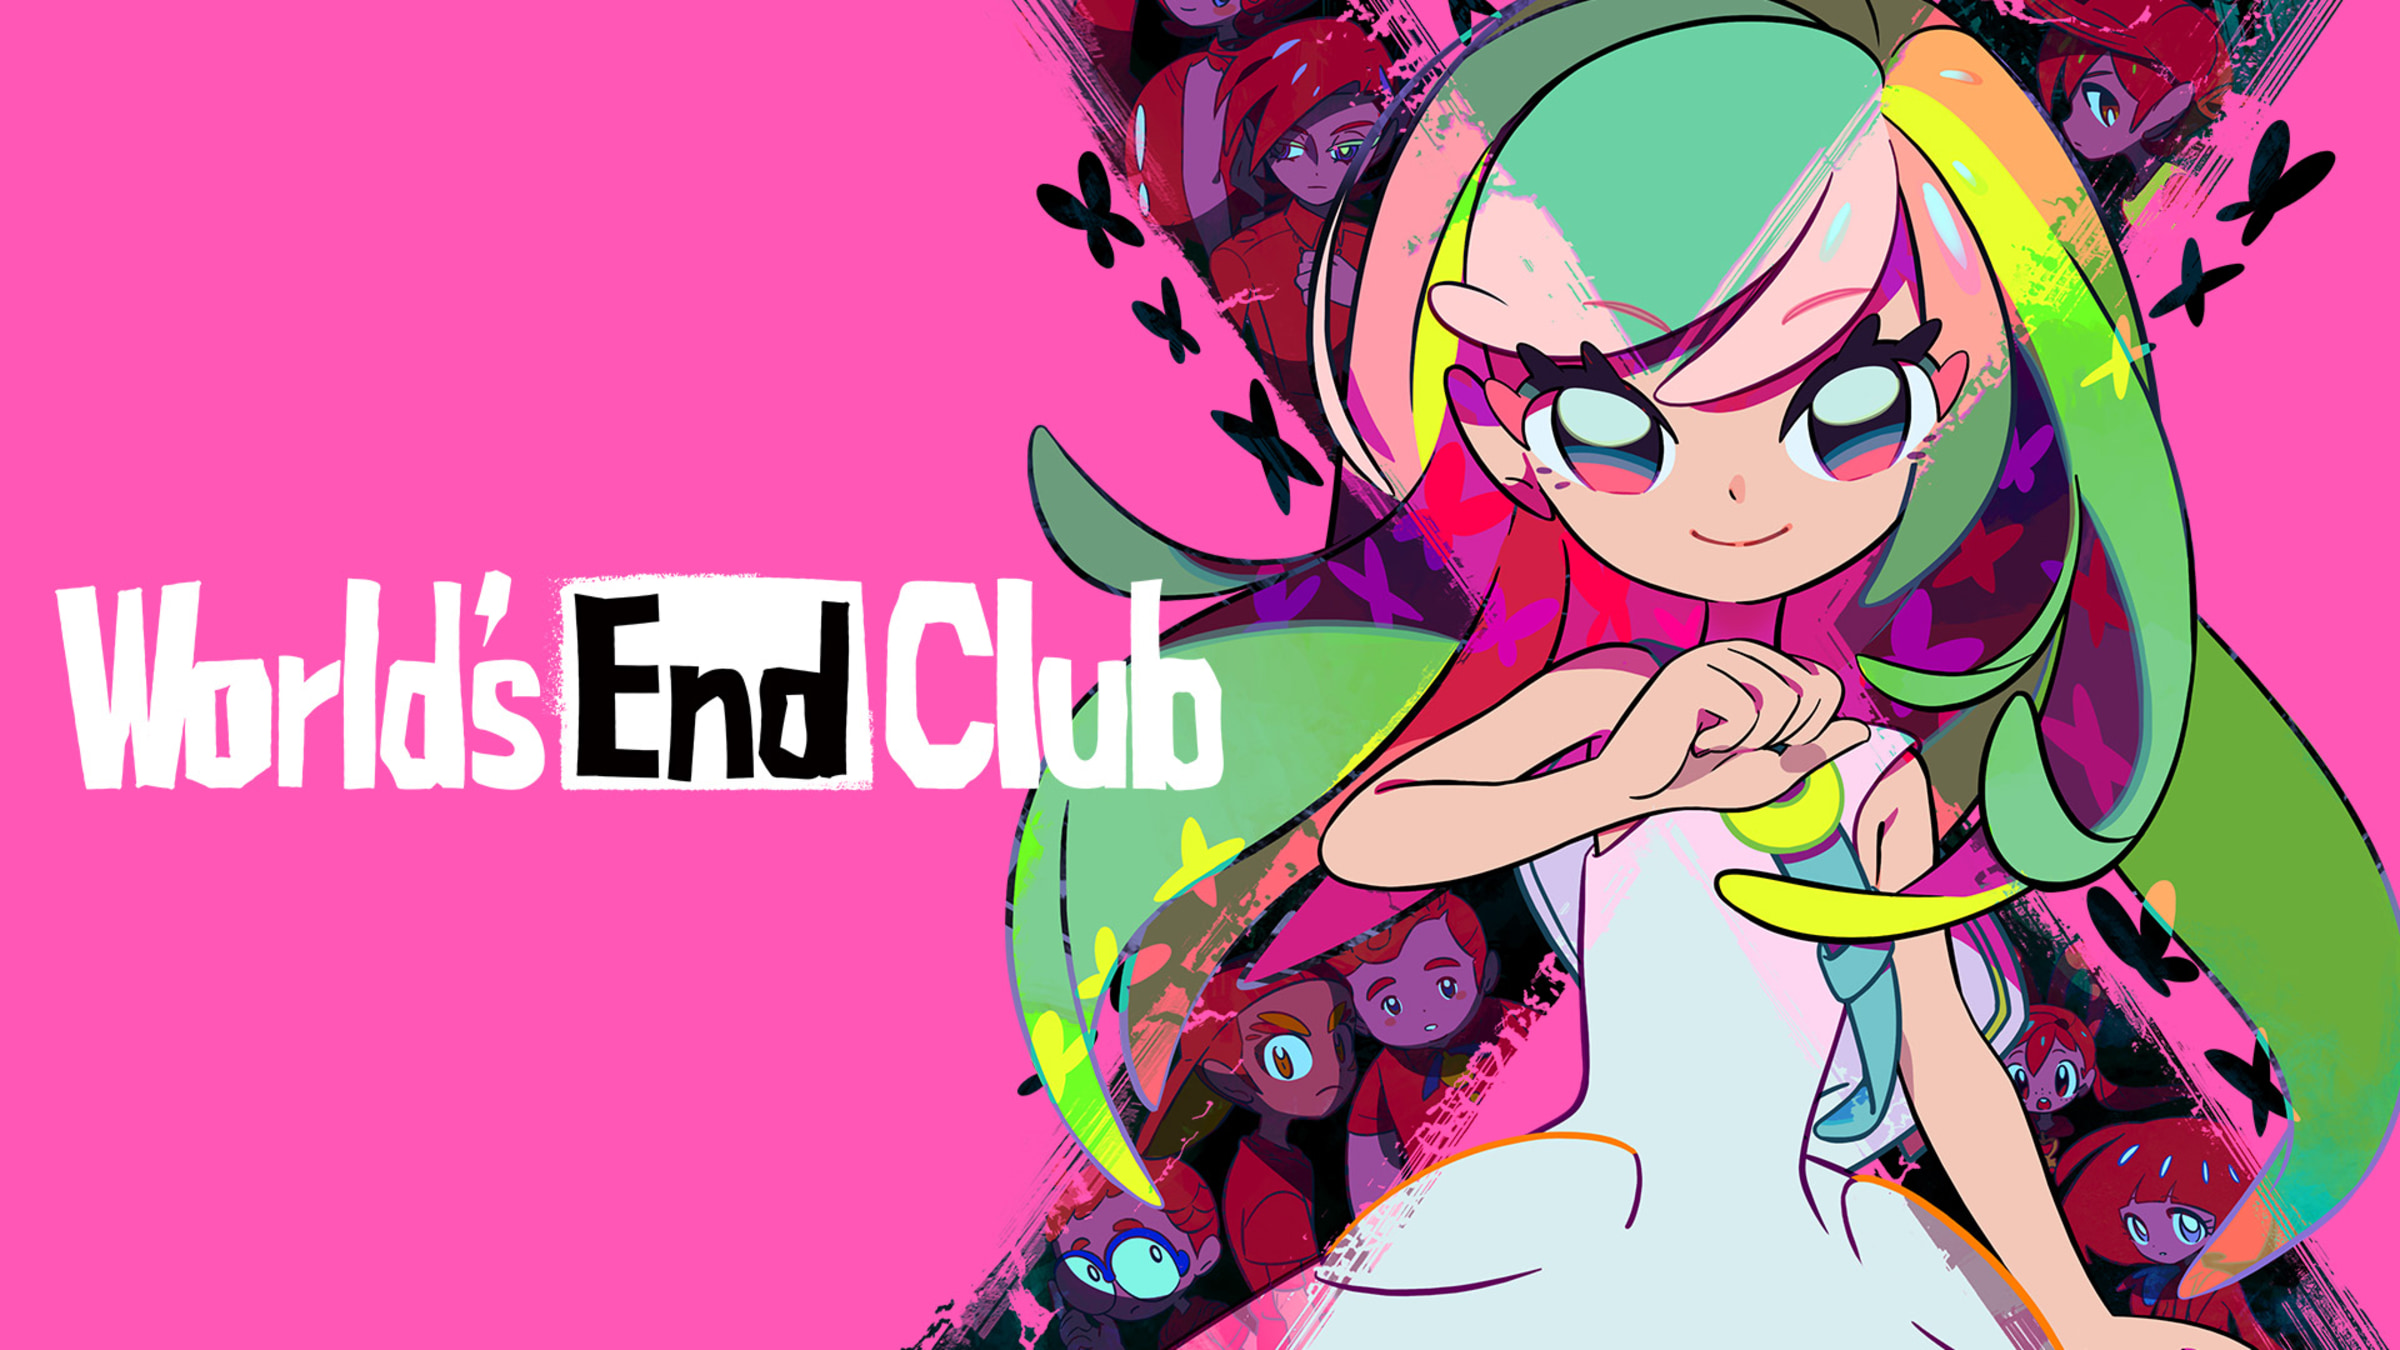 World's End Club Official Site